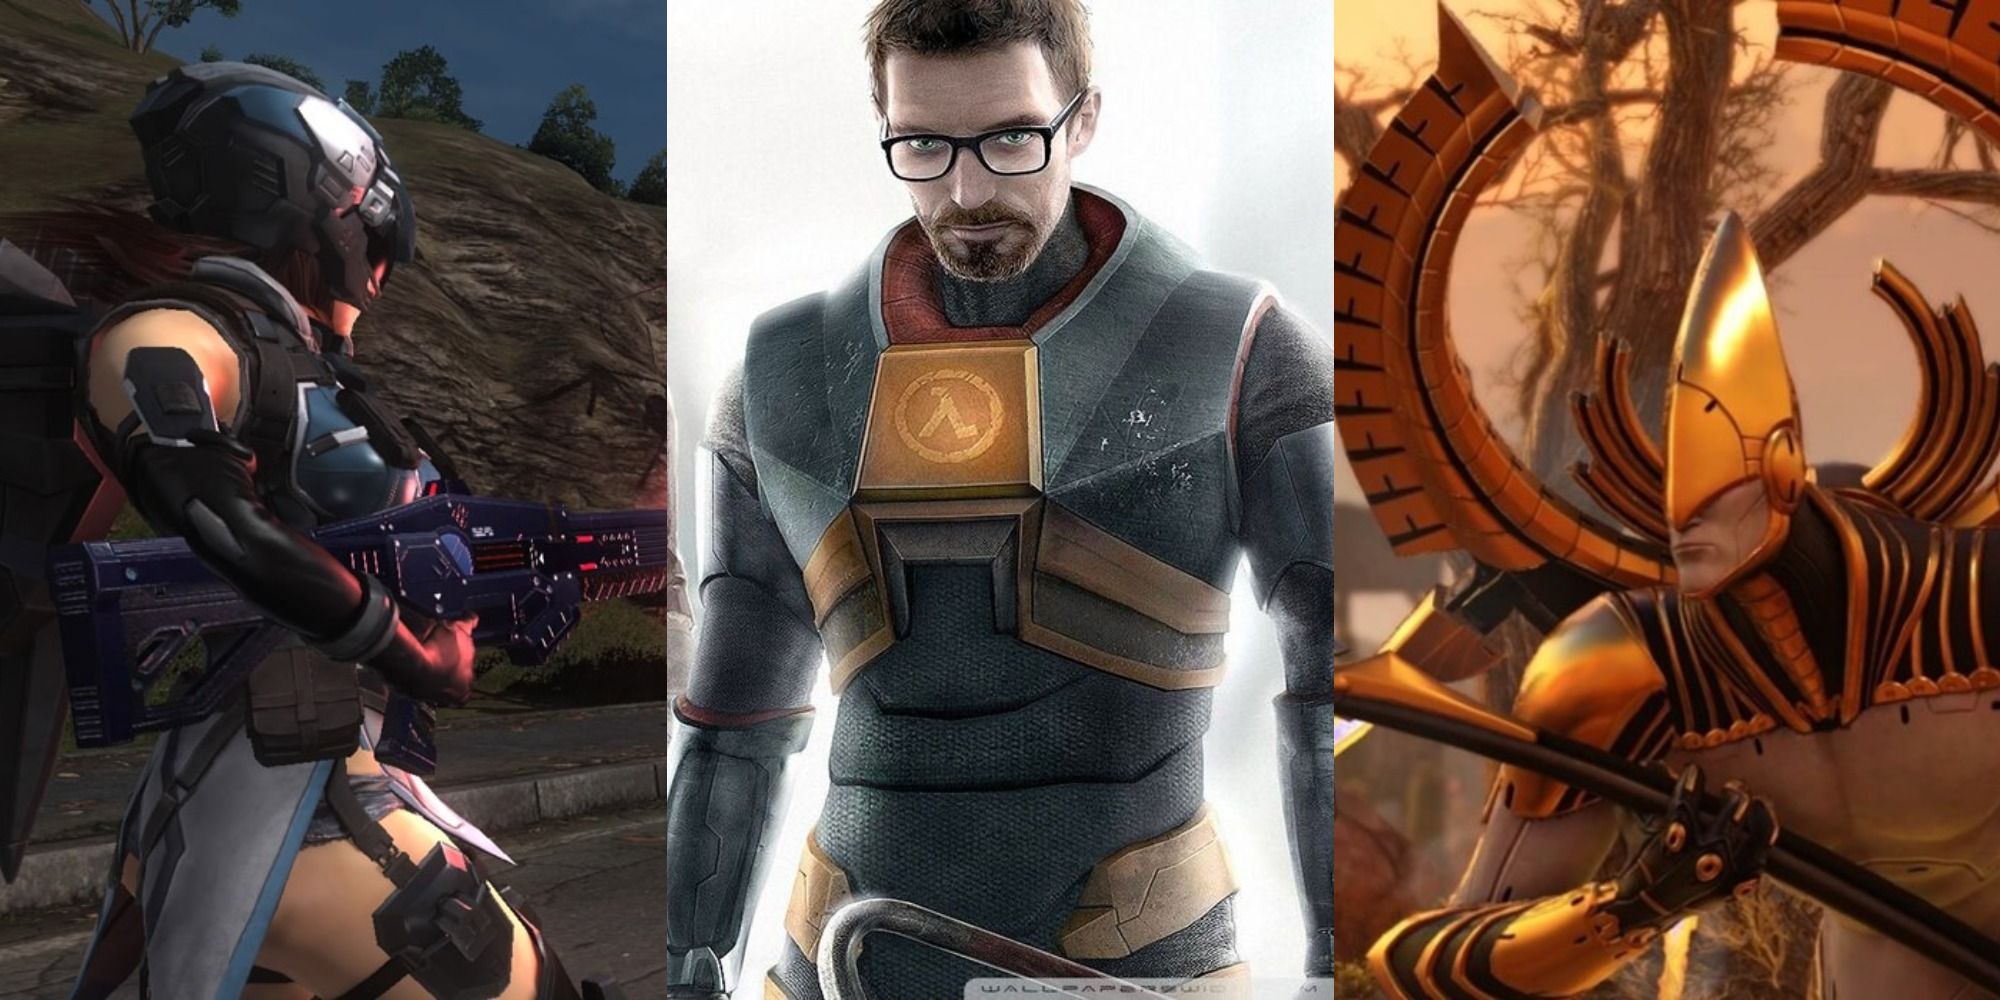 A split image featuring characters from XCOM 2, Half Life 2, and Earth Defense Force